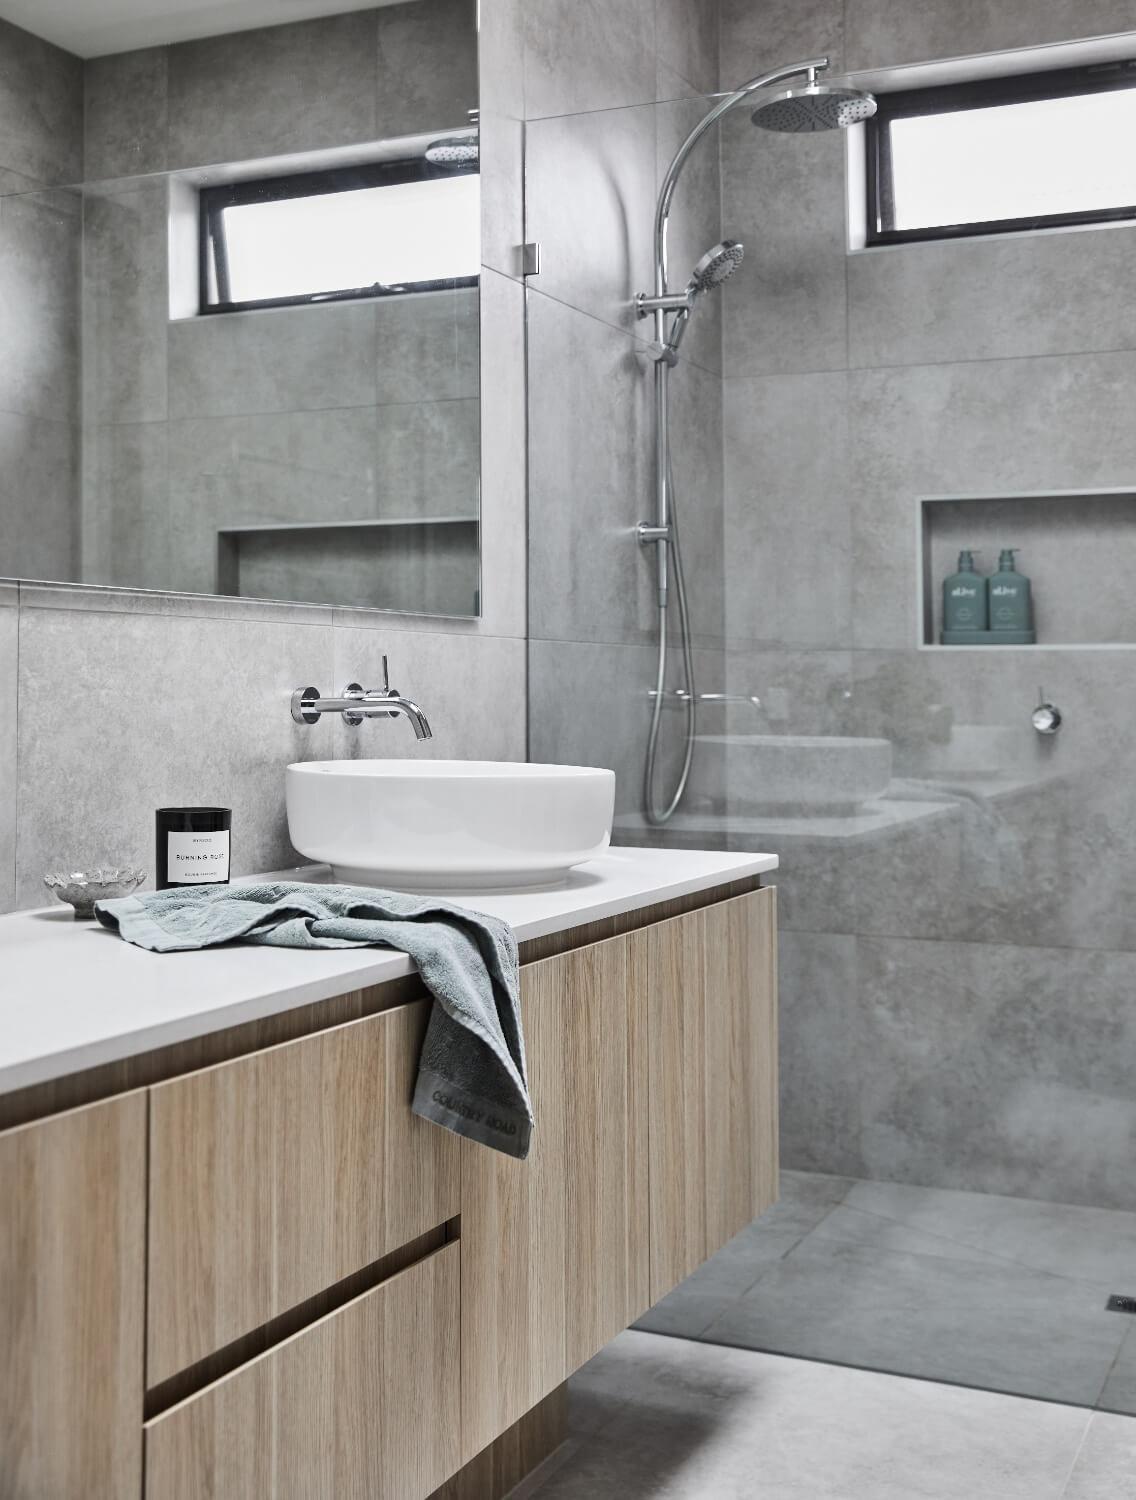 Modern Bathroom With Light Wood And Grey Tiling Selection